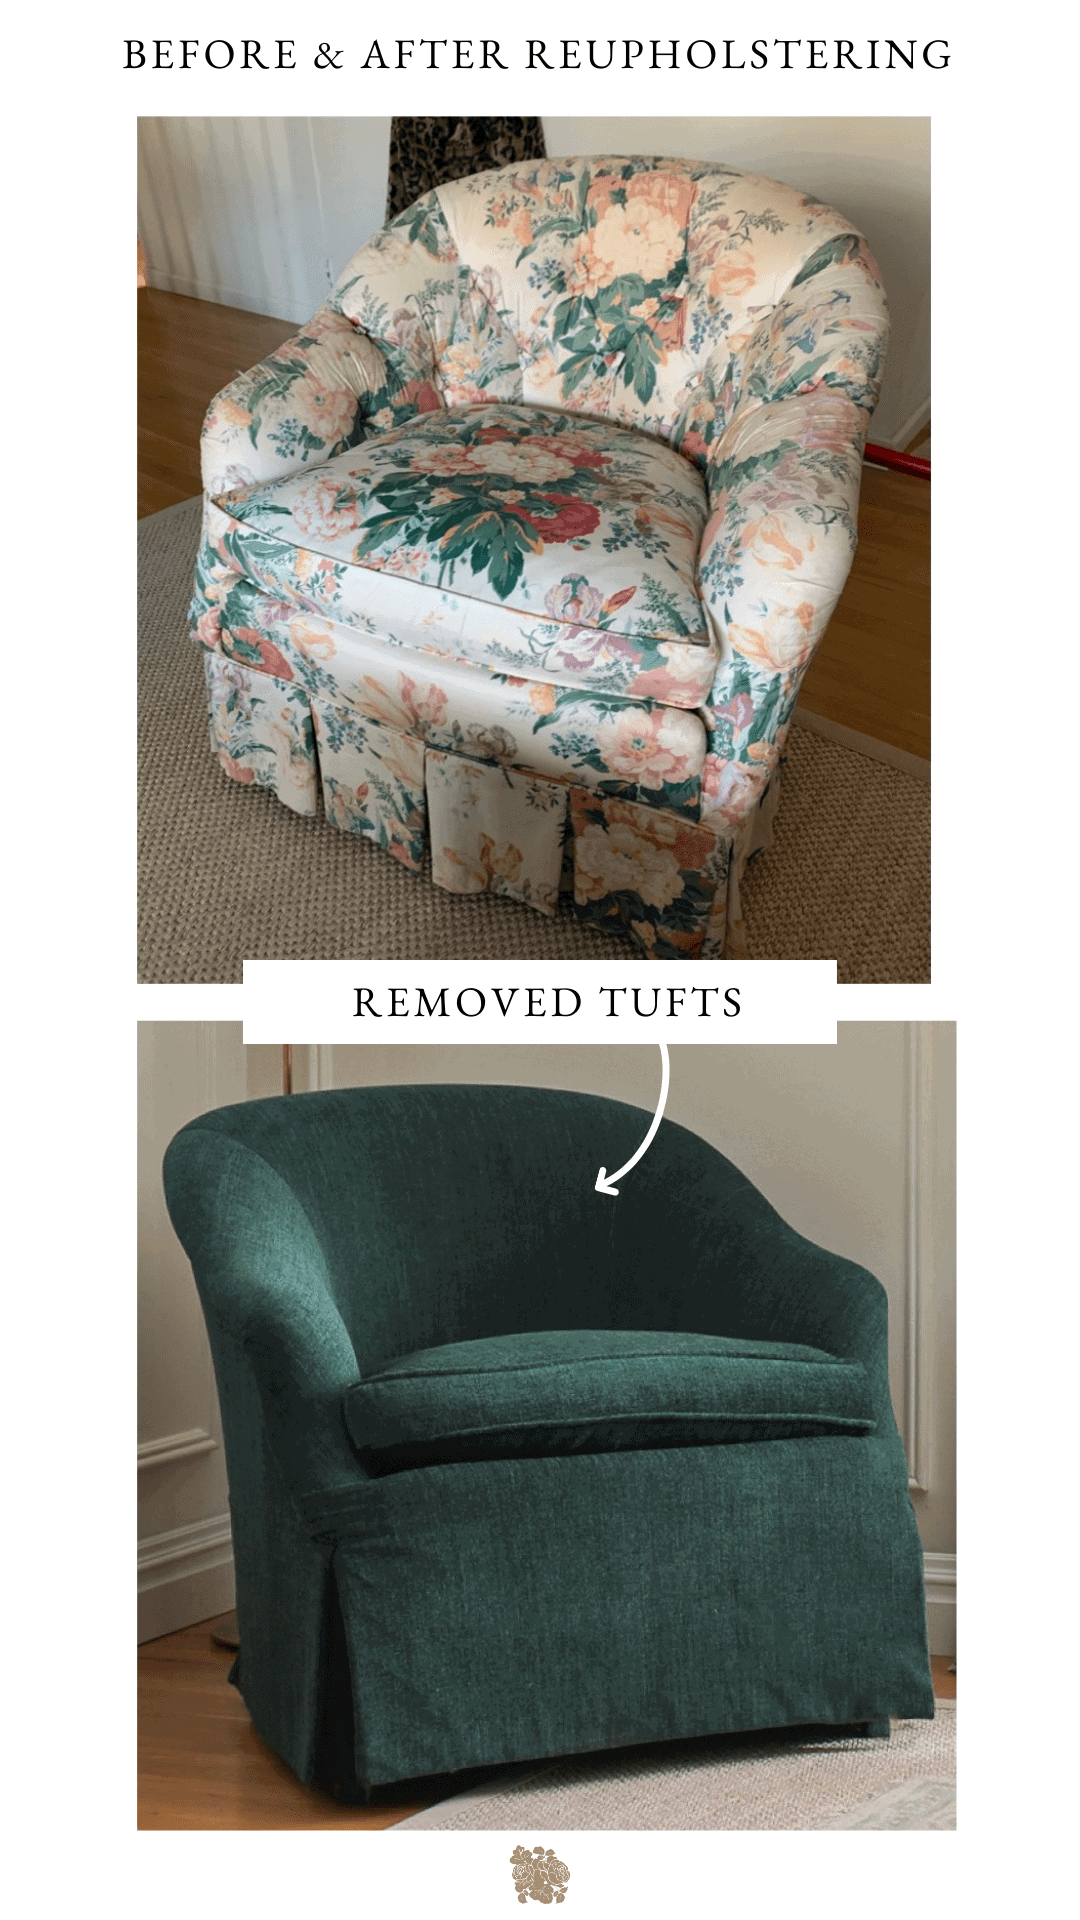 BEFORE-AFTER-UPHOLSTERY-CHAIR-PROJECT-HOW-TO-CHOOSE-FABRIC-FOR-REUPHOLSTERING